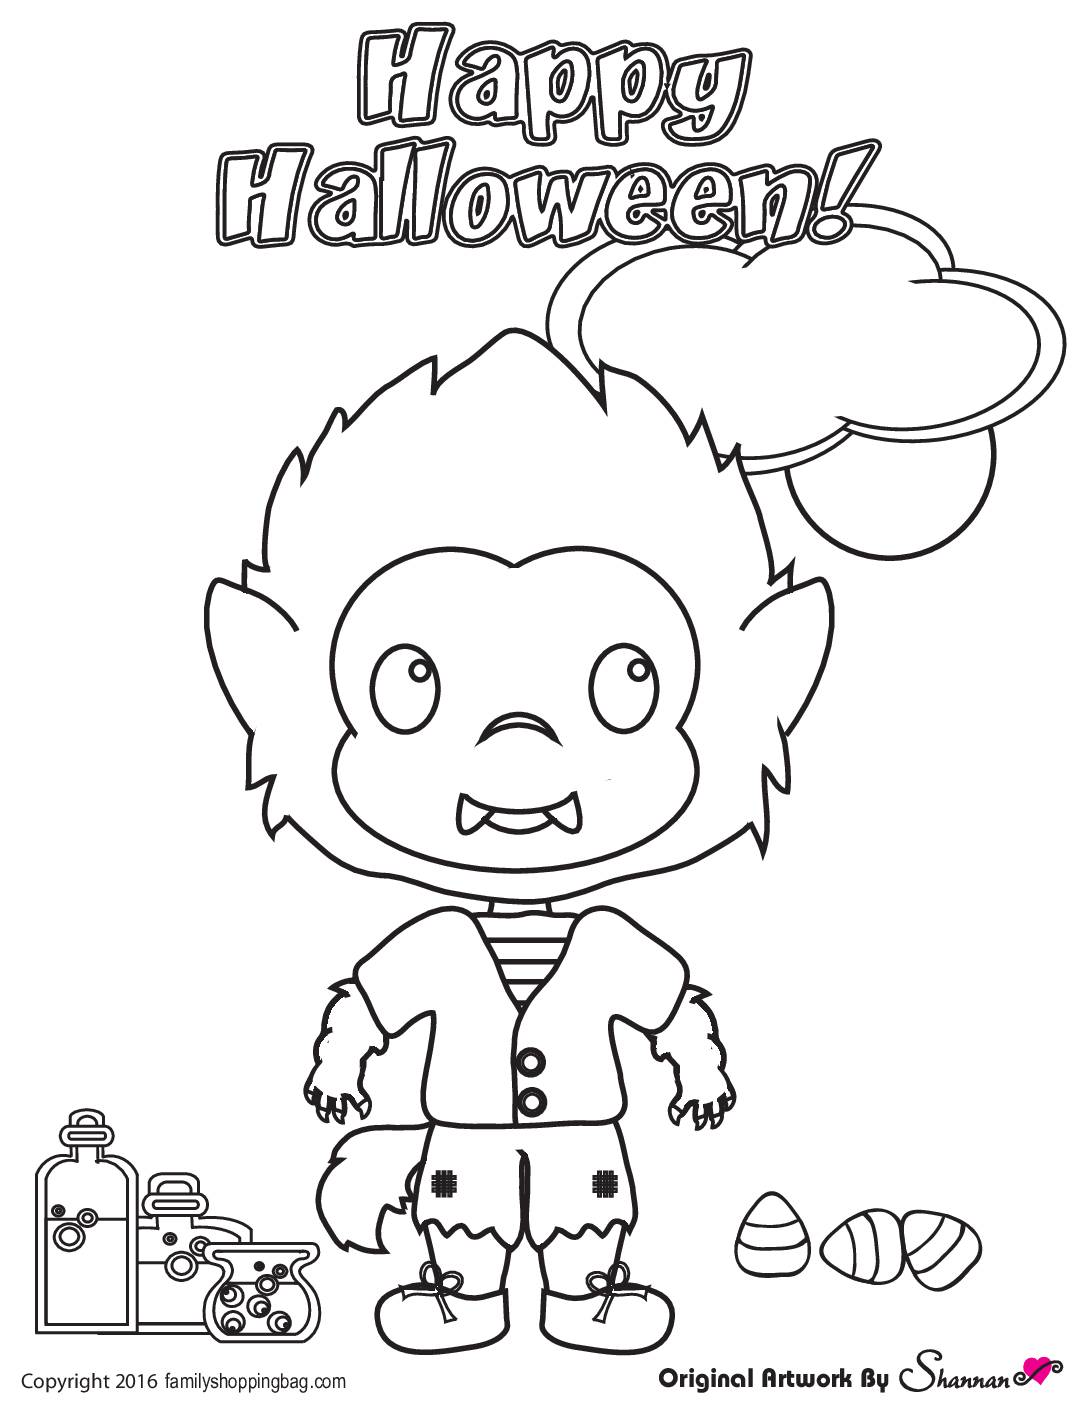 Halloween Coloring Page 5 Coloring Pages